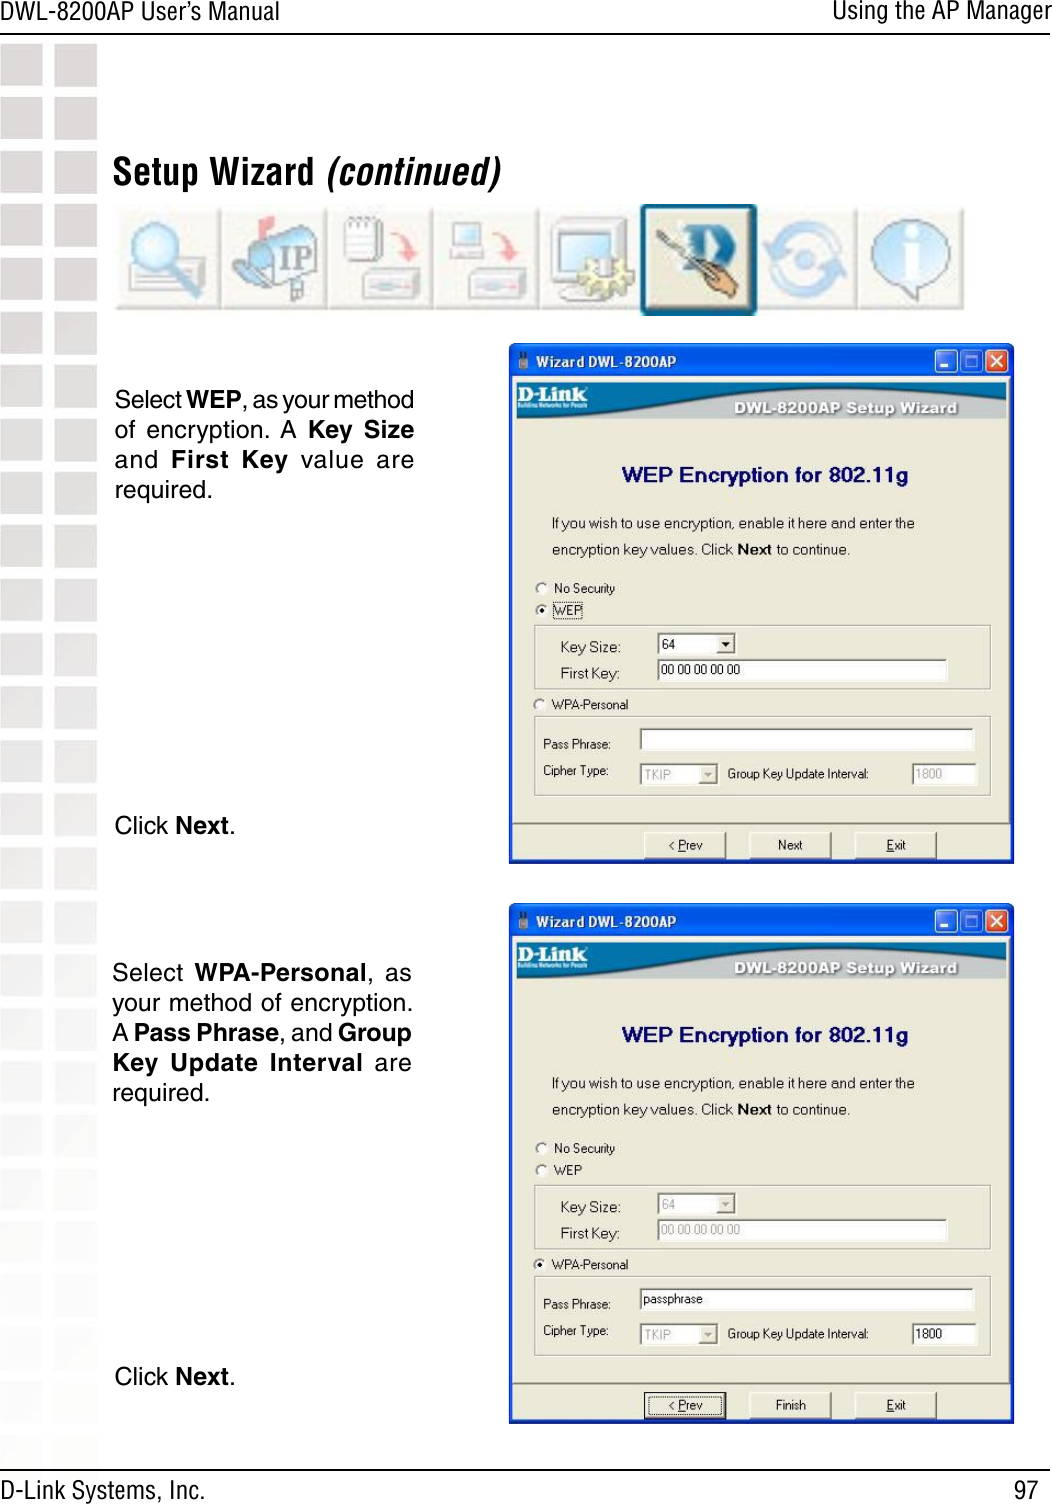 97DWL-8200AP User’s ManualD-Link Systems, Inc.Using the AP ManagerSetup Wizard (continued)Select WEP, as your method of  encryption.  A  Key  Size and  First  Key  value  are required.Click Next.Select  WPA-Personal,  as your method of encryption. A Pass Phrase, and Group Key  Update  Interval are required.Click Next.